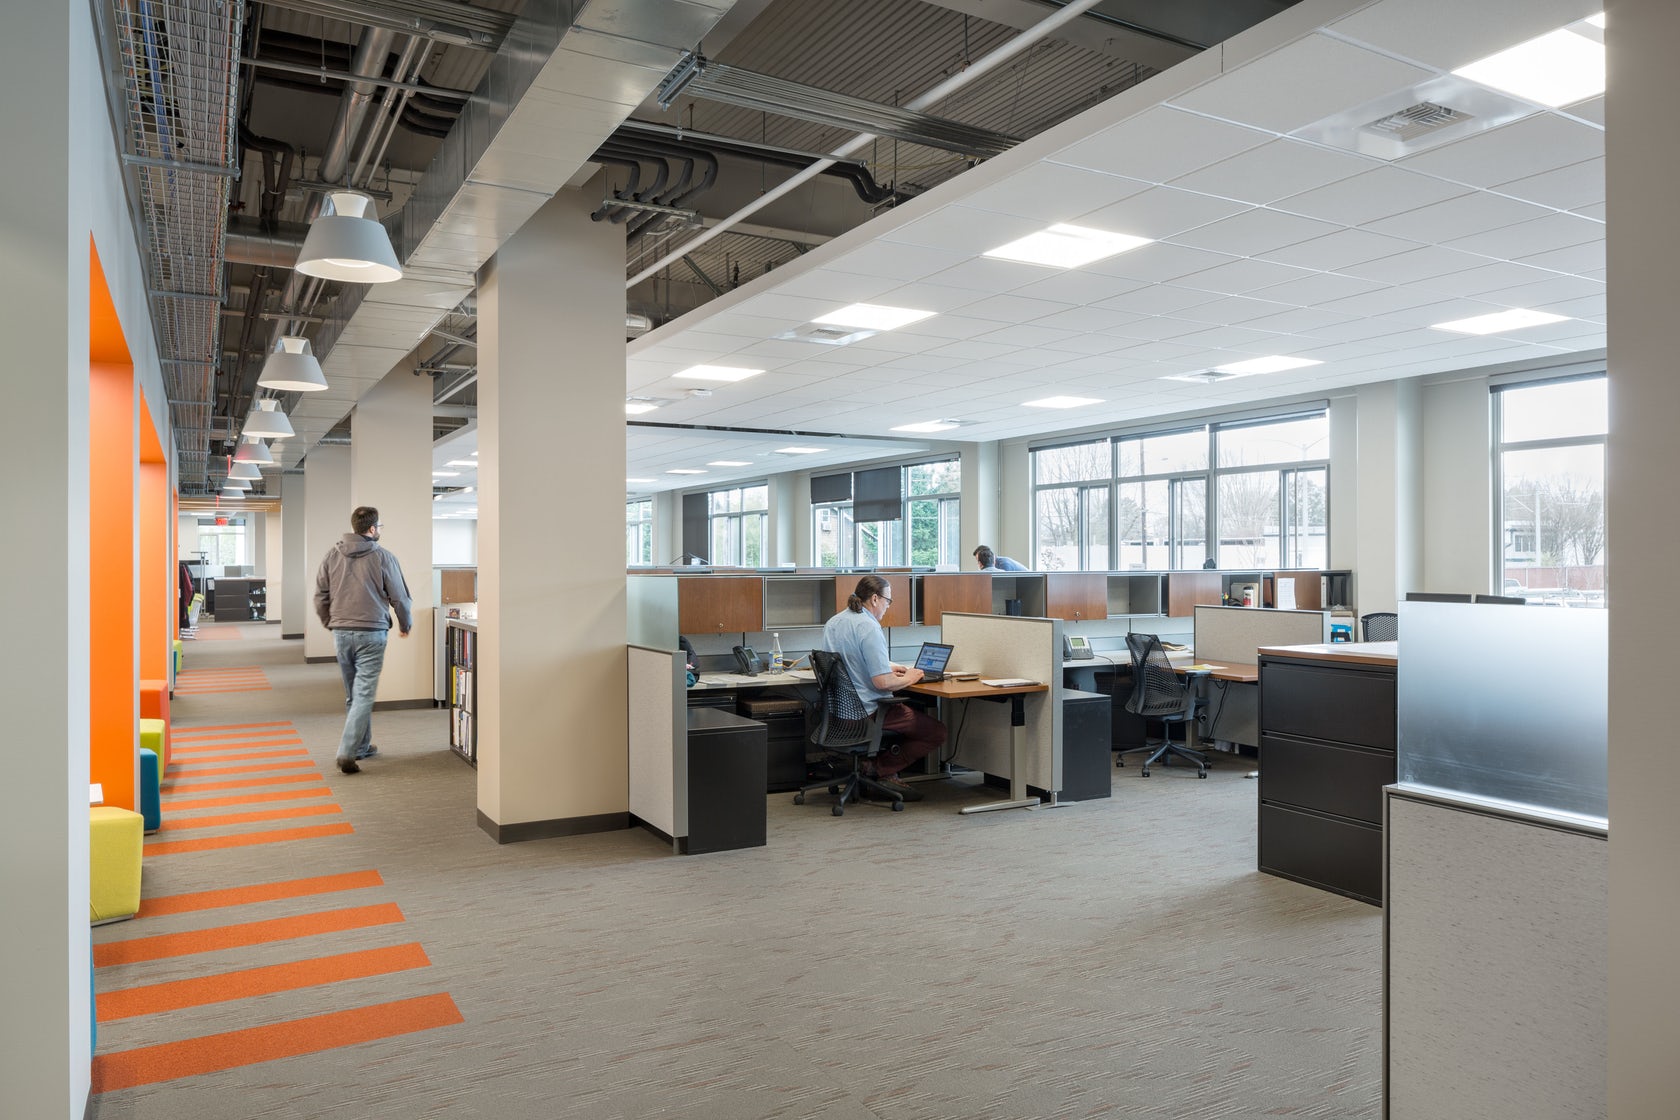 Factors To Consider When Installing A Suspended Ceiling In Your Workplace